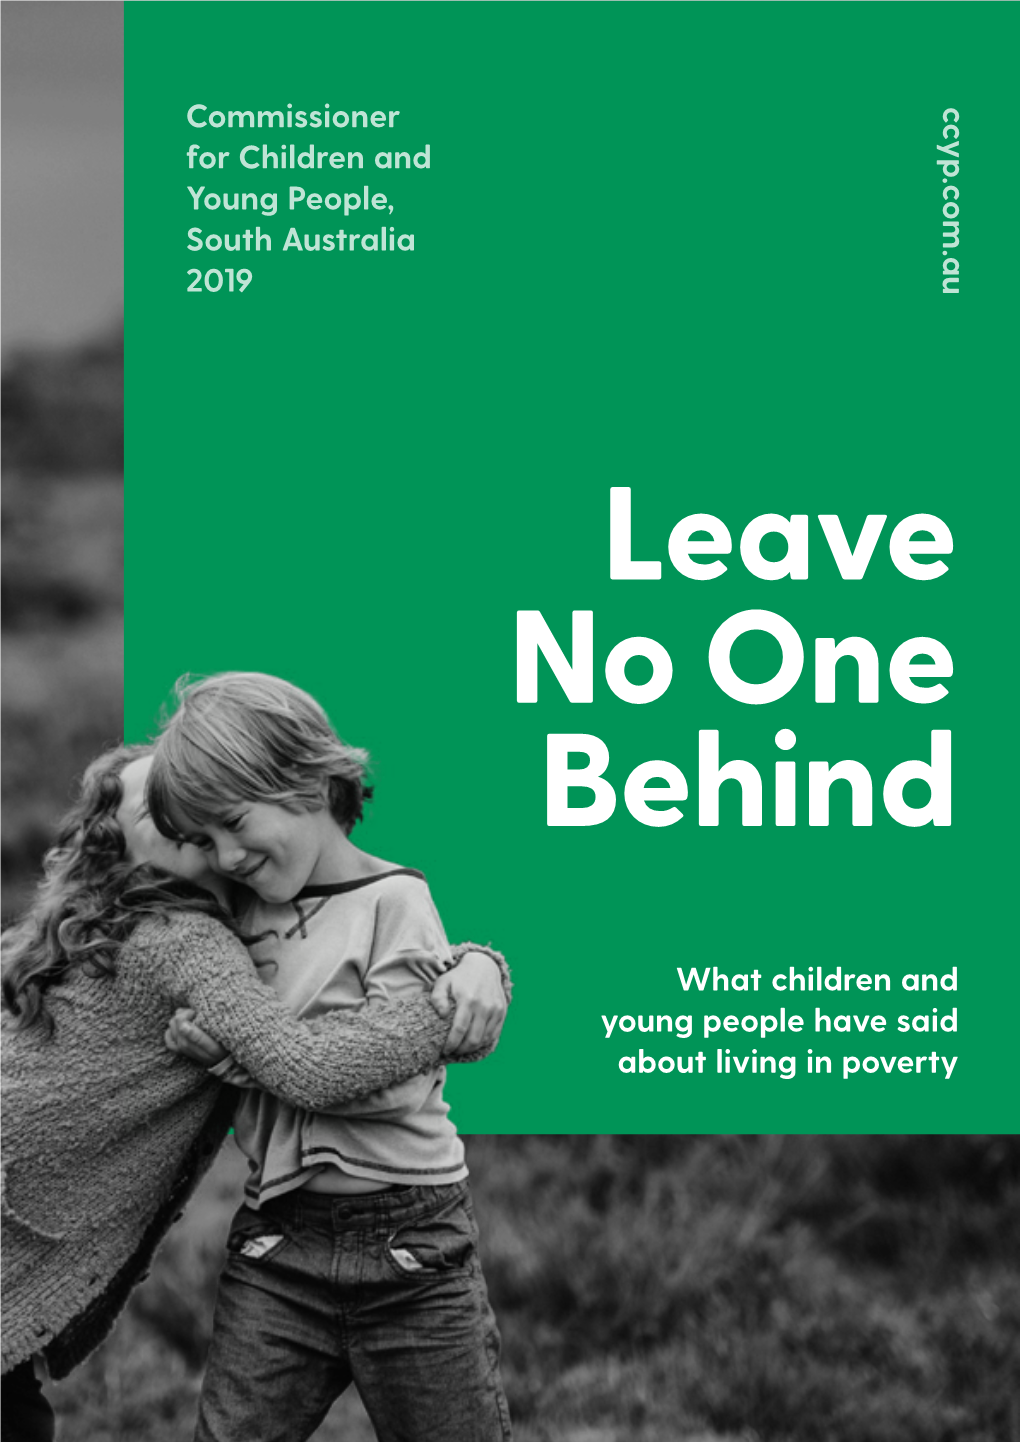 Commissioner for Children and Young People, South Australia 2019 Ccyp